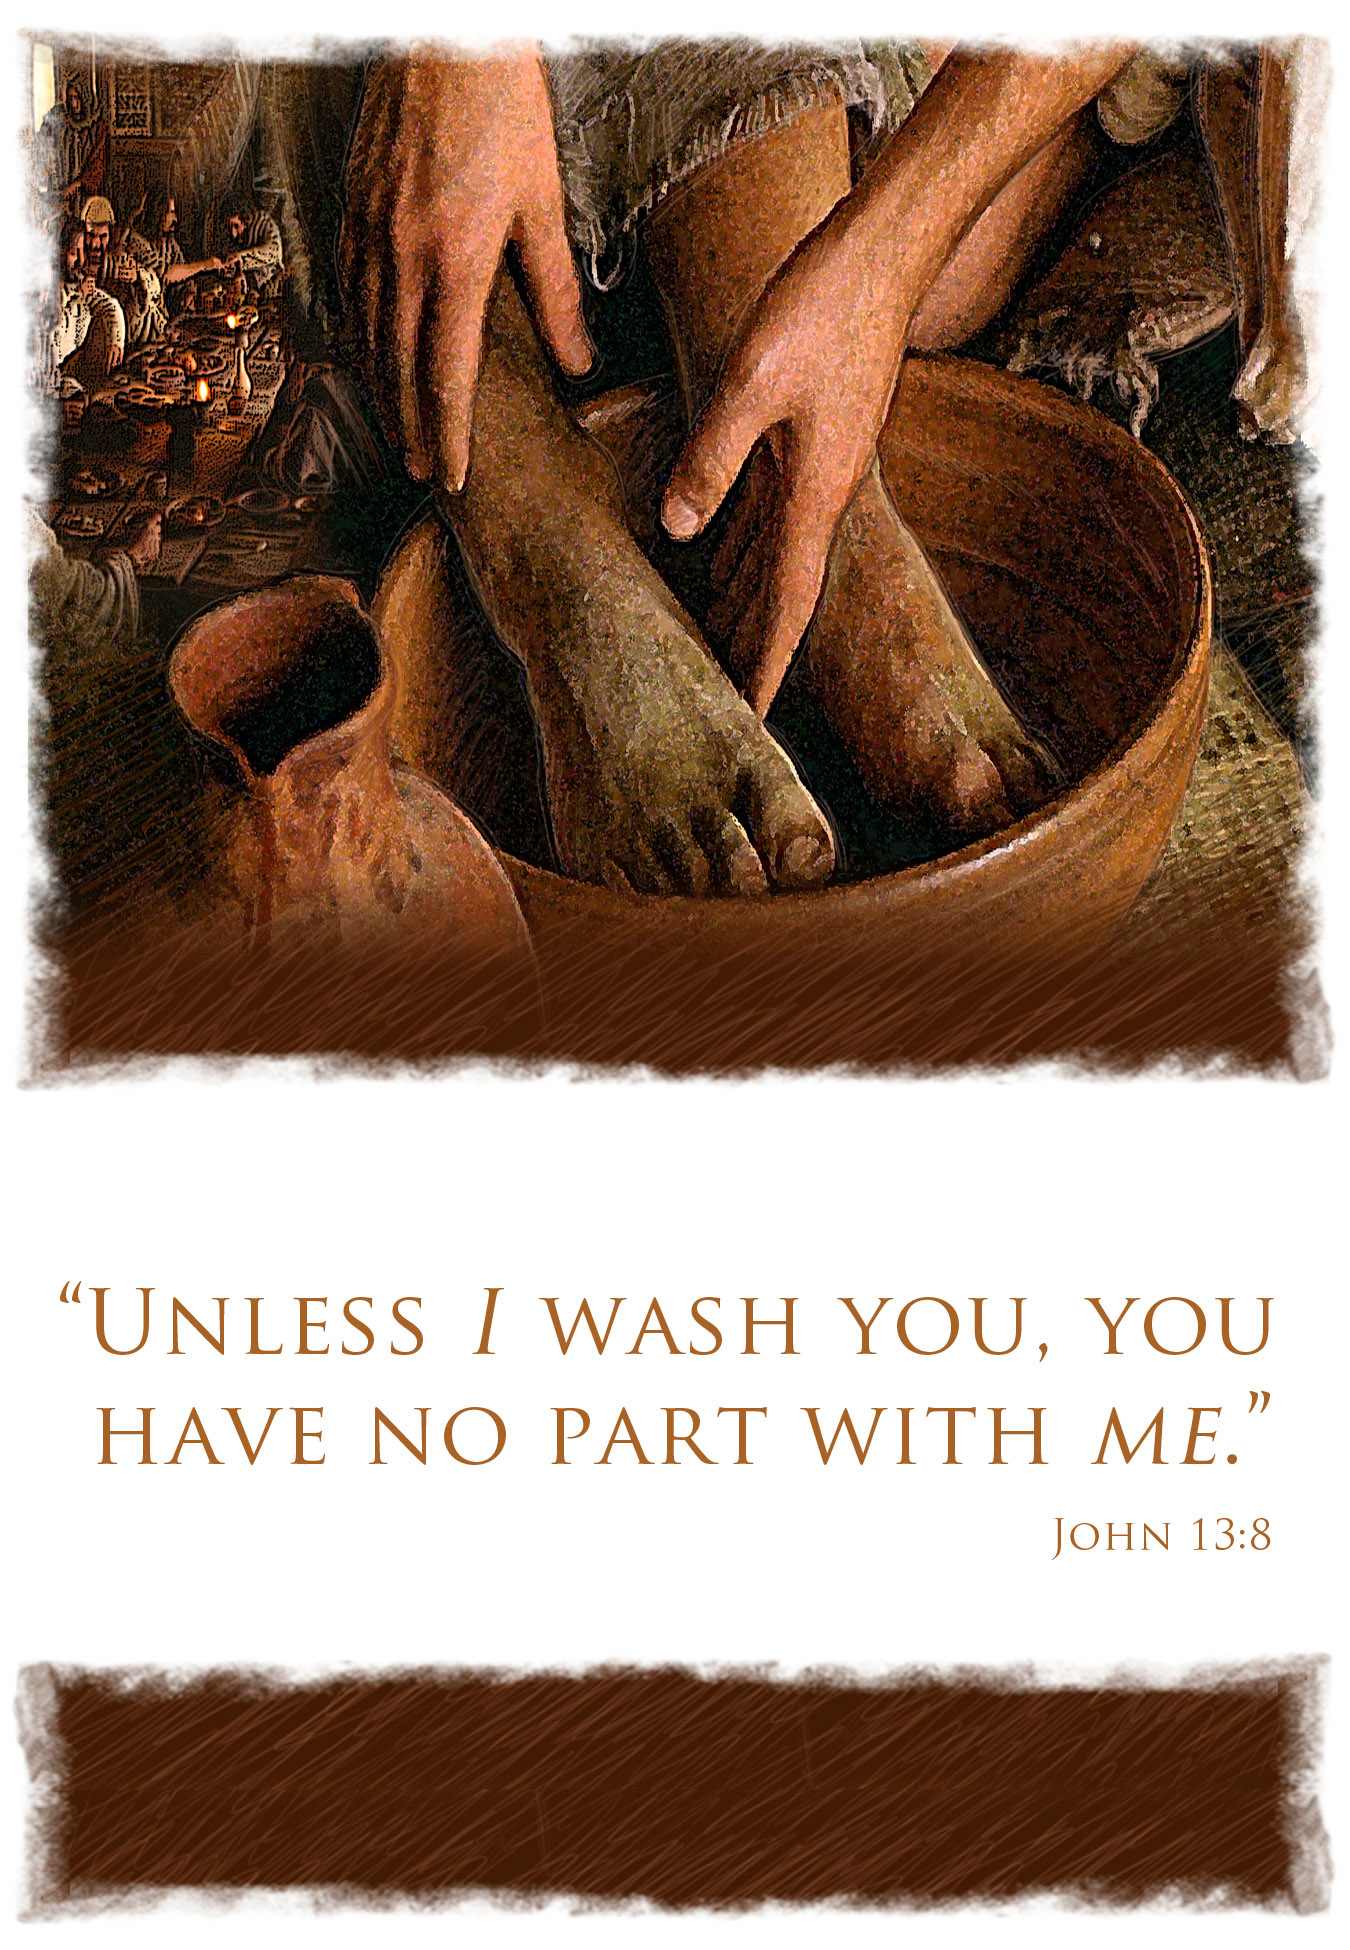 Jesus washing the feet of His disciples with Scripture: "Unless I wash you, you have with Me." John 13:8